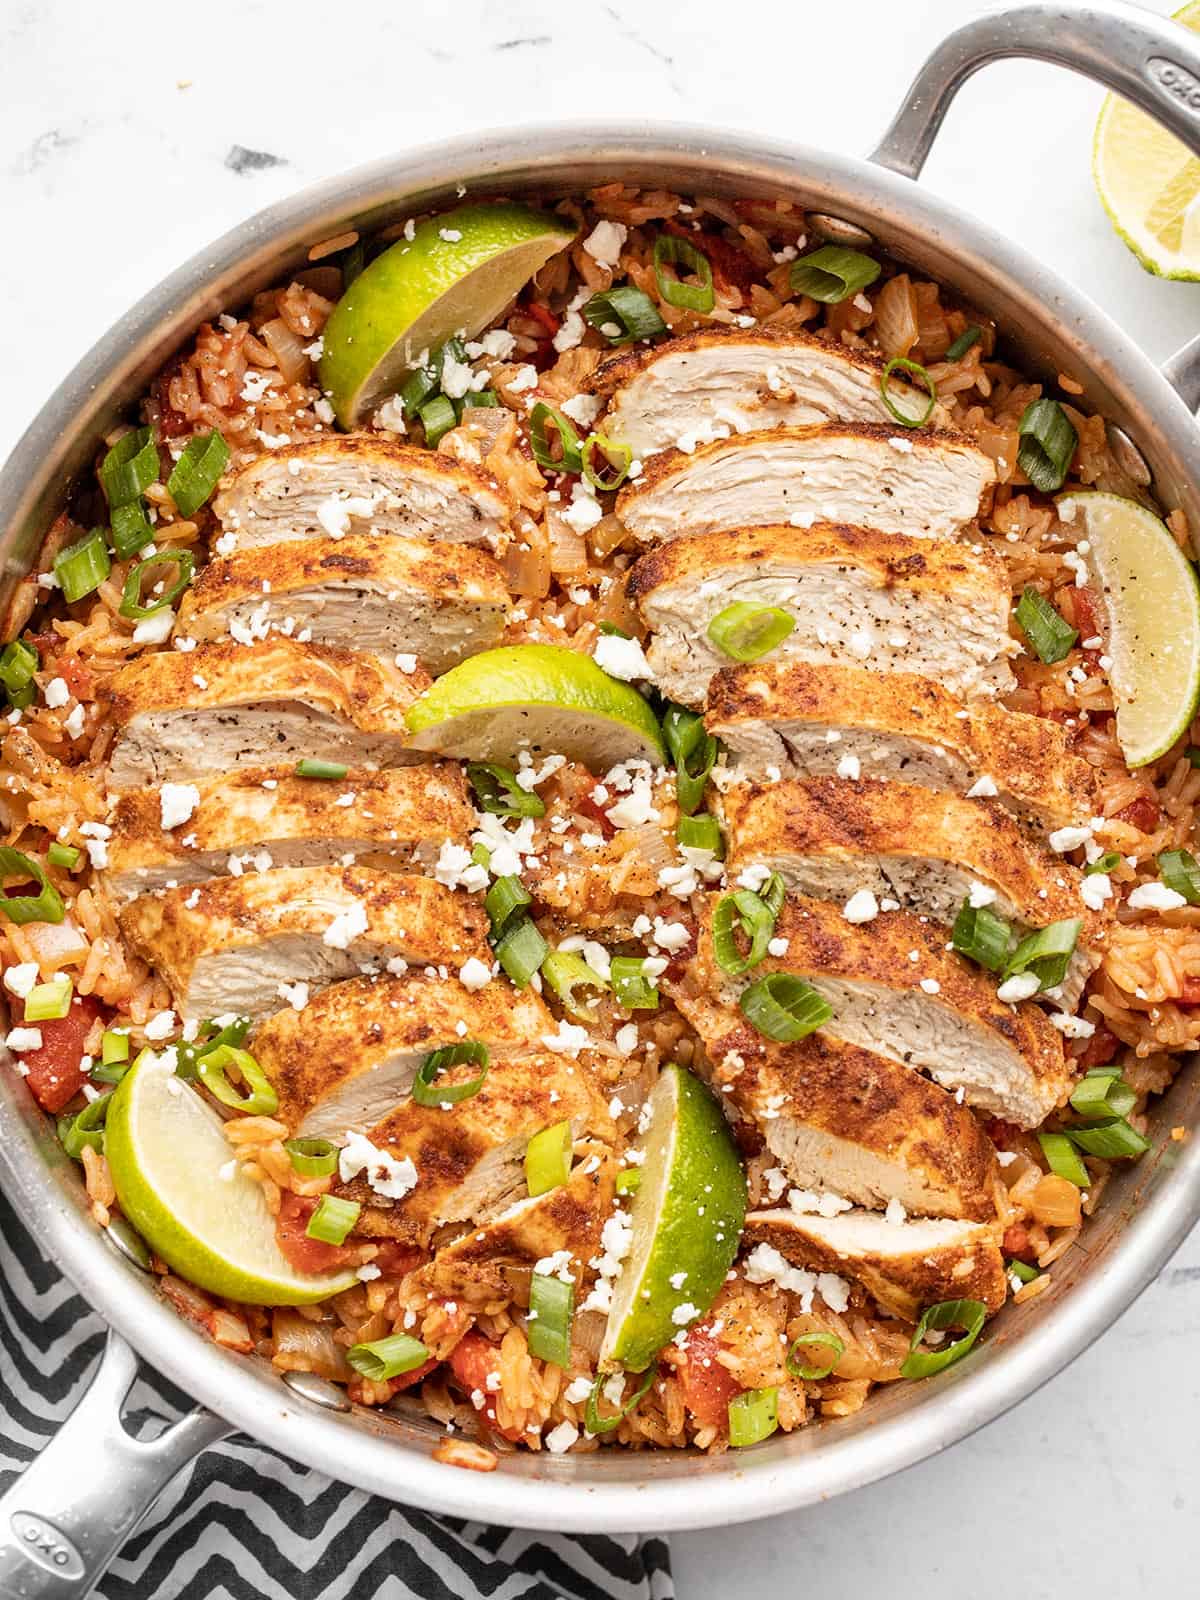 chipotle lime chicken and rice in the skillet, garnished with lime wedges